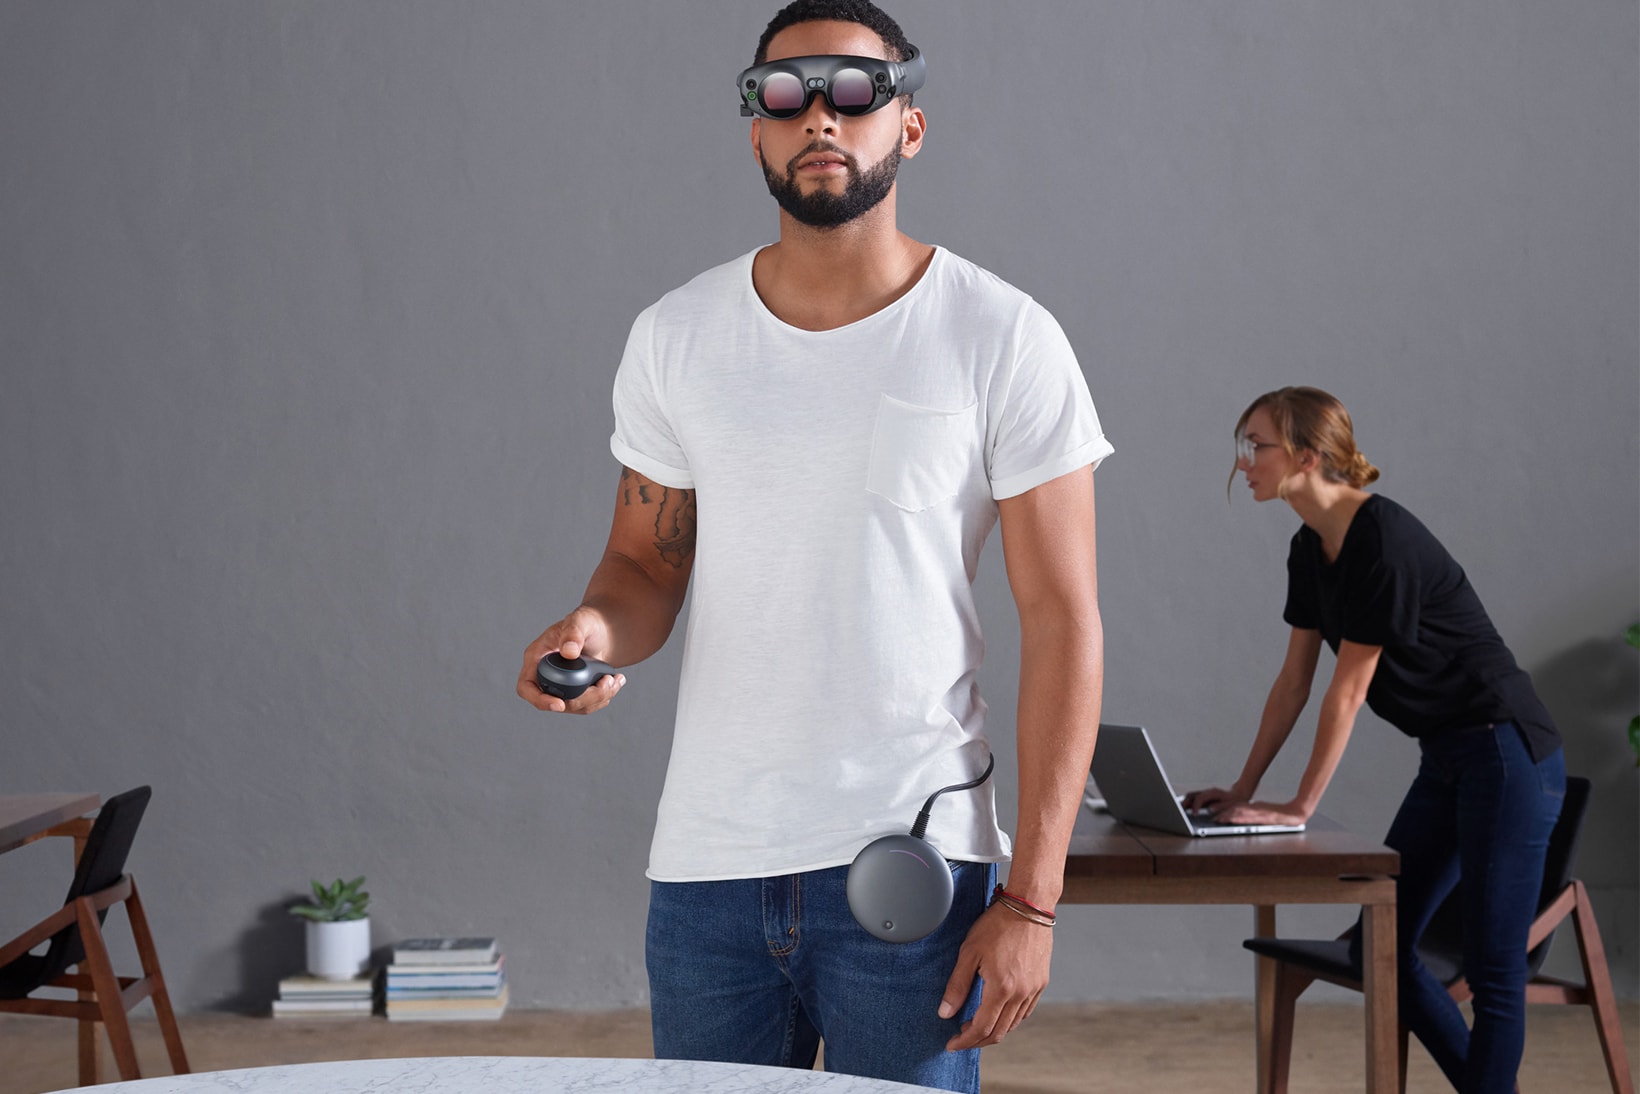 Magic Leap Augmented Reality Goggles One Creator Edition startup lightwear lightpack control 2018 software virtual debut release